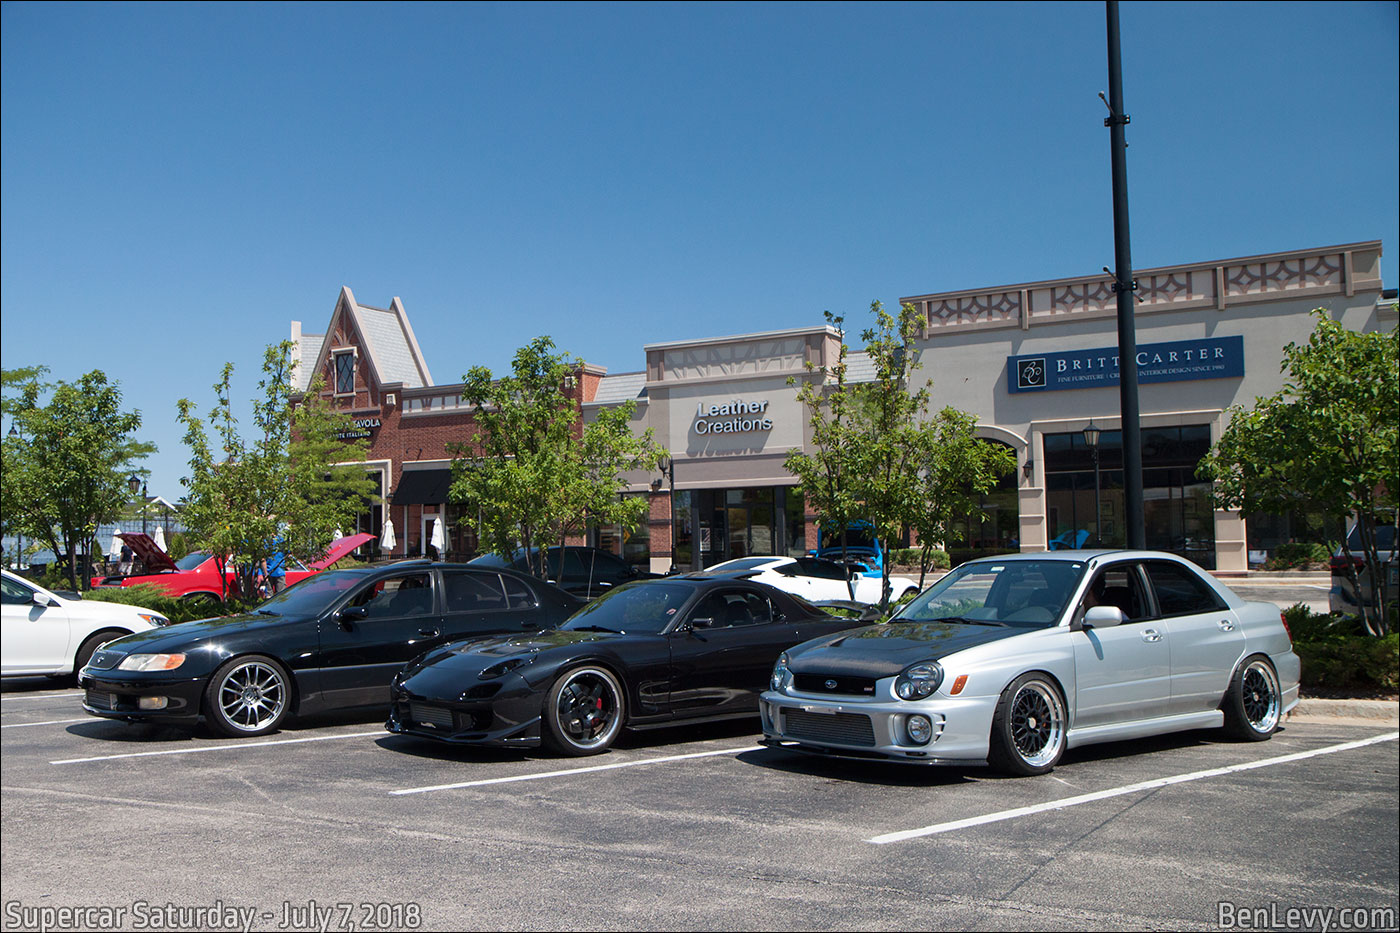 GS300, RX-7, and WRX